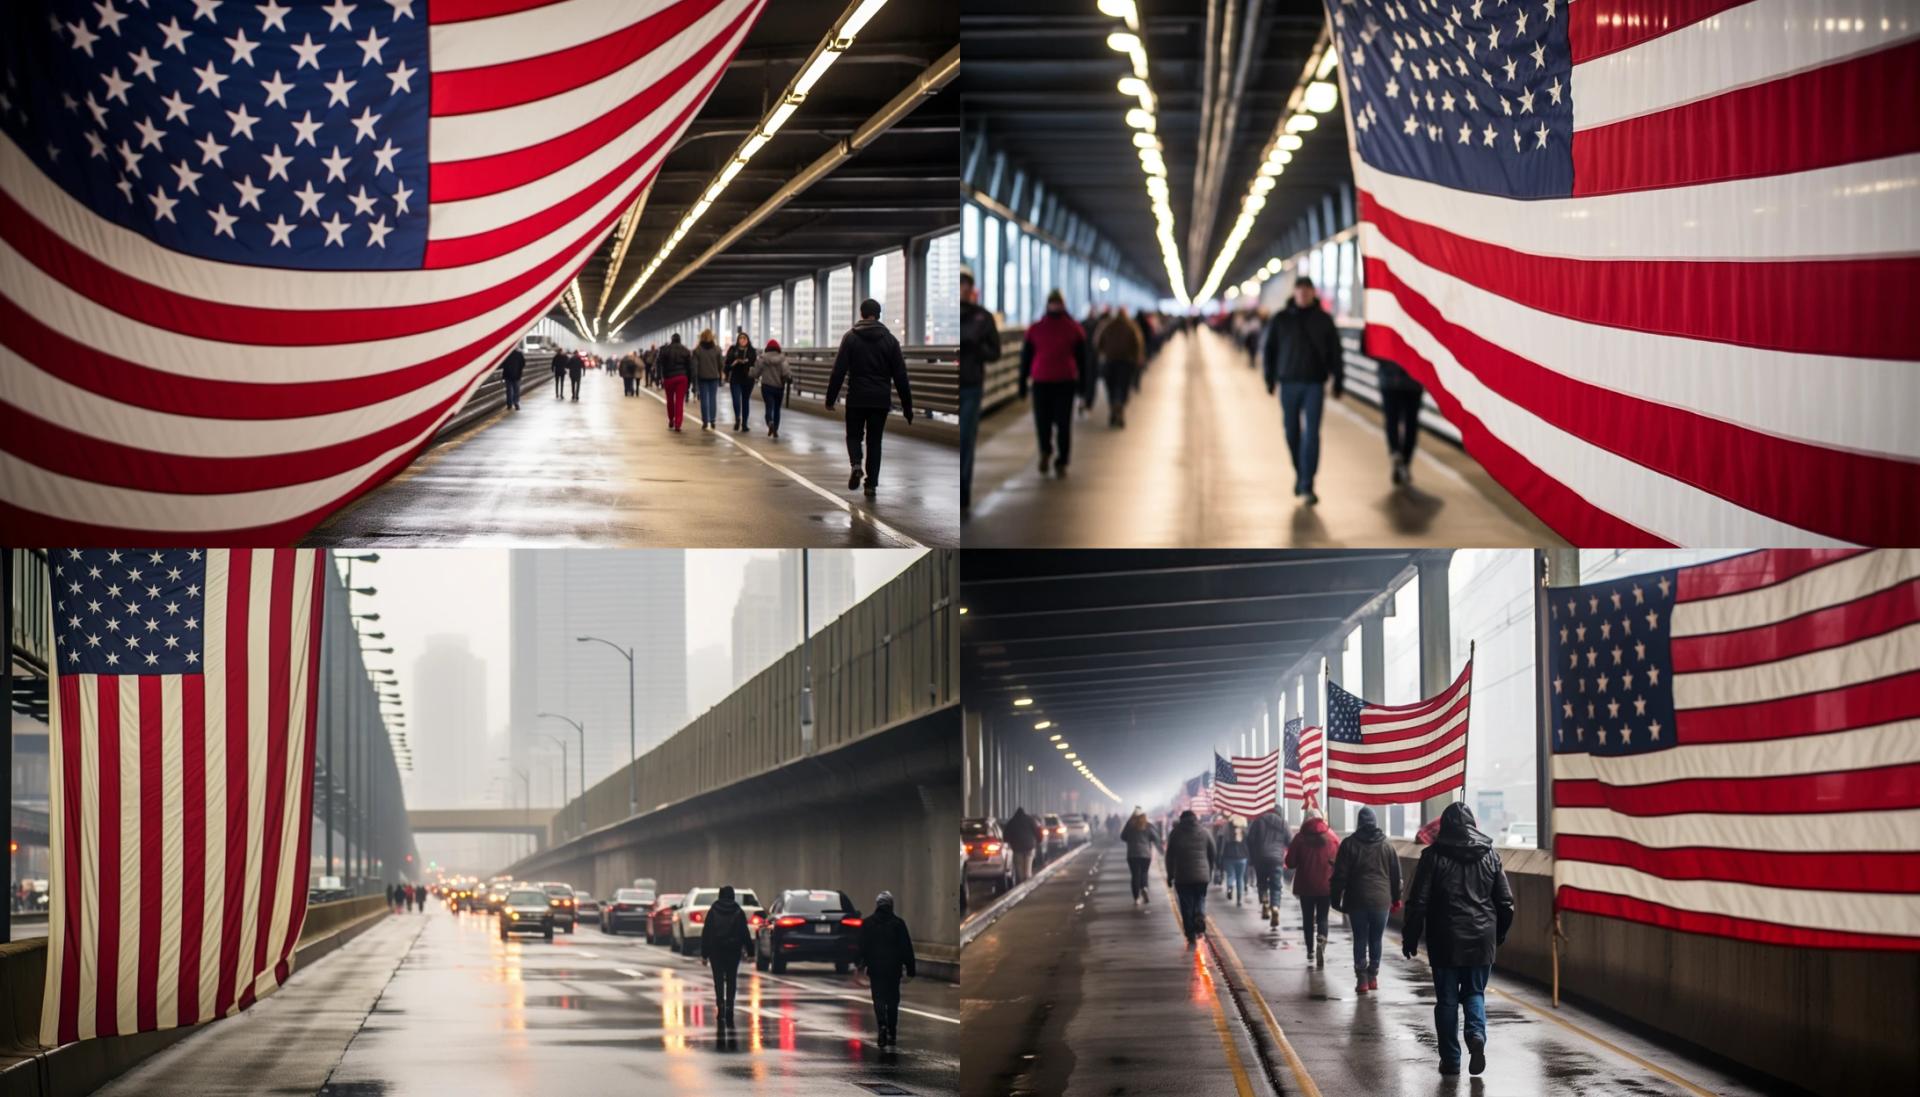 Participants crossing the Brooklyn-Battery Tunnel during the Tunnel to Towers 5K Run & Walk in NYC, captured with a Canon EOS 5D Mark IV.